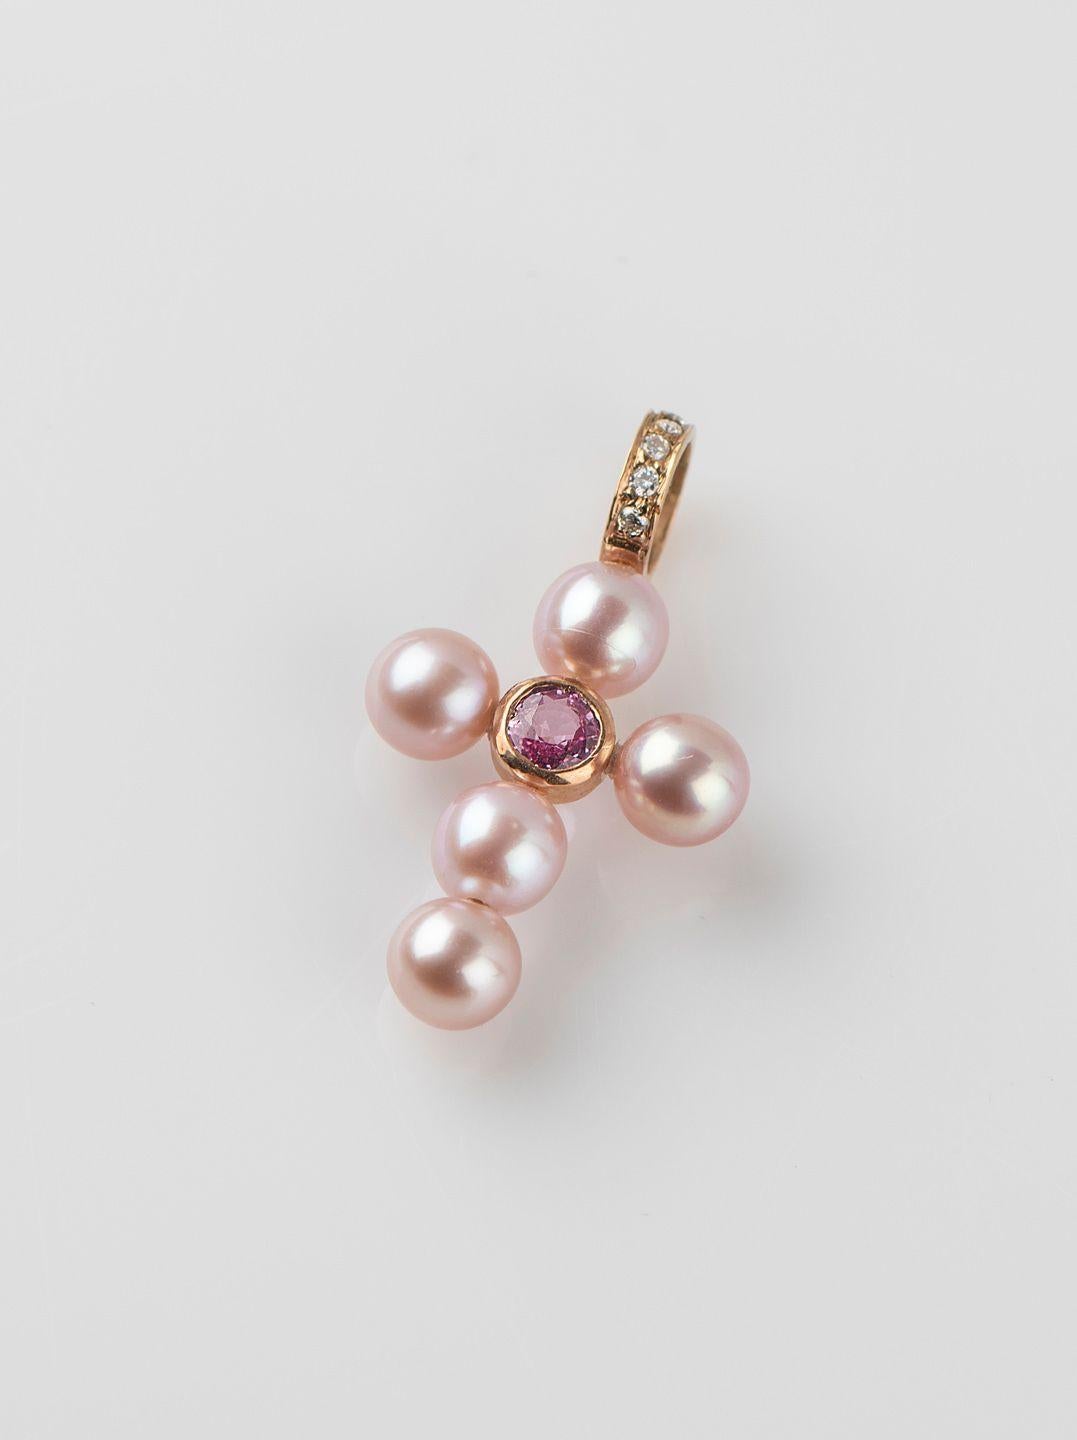 Round Cut Pink Sapphire and Diamonds Pink Pearl Cross Charm, 18K Gold For Sale